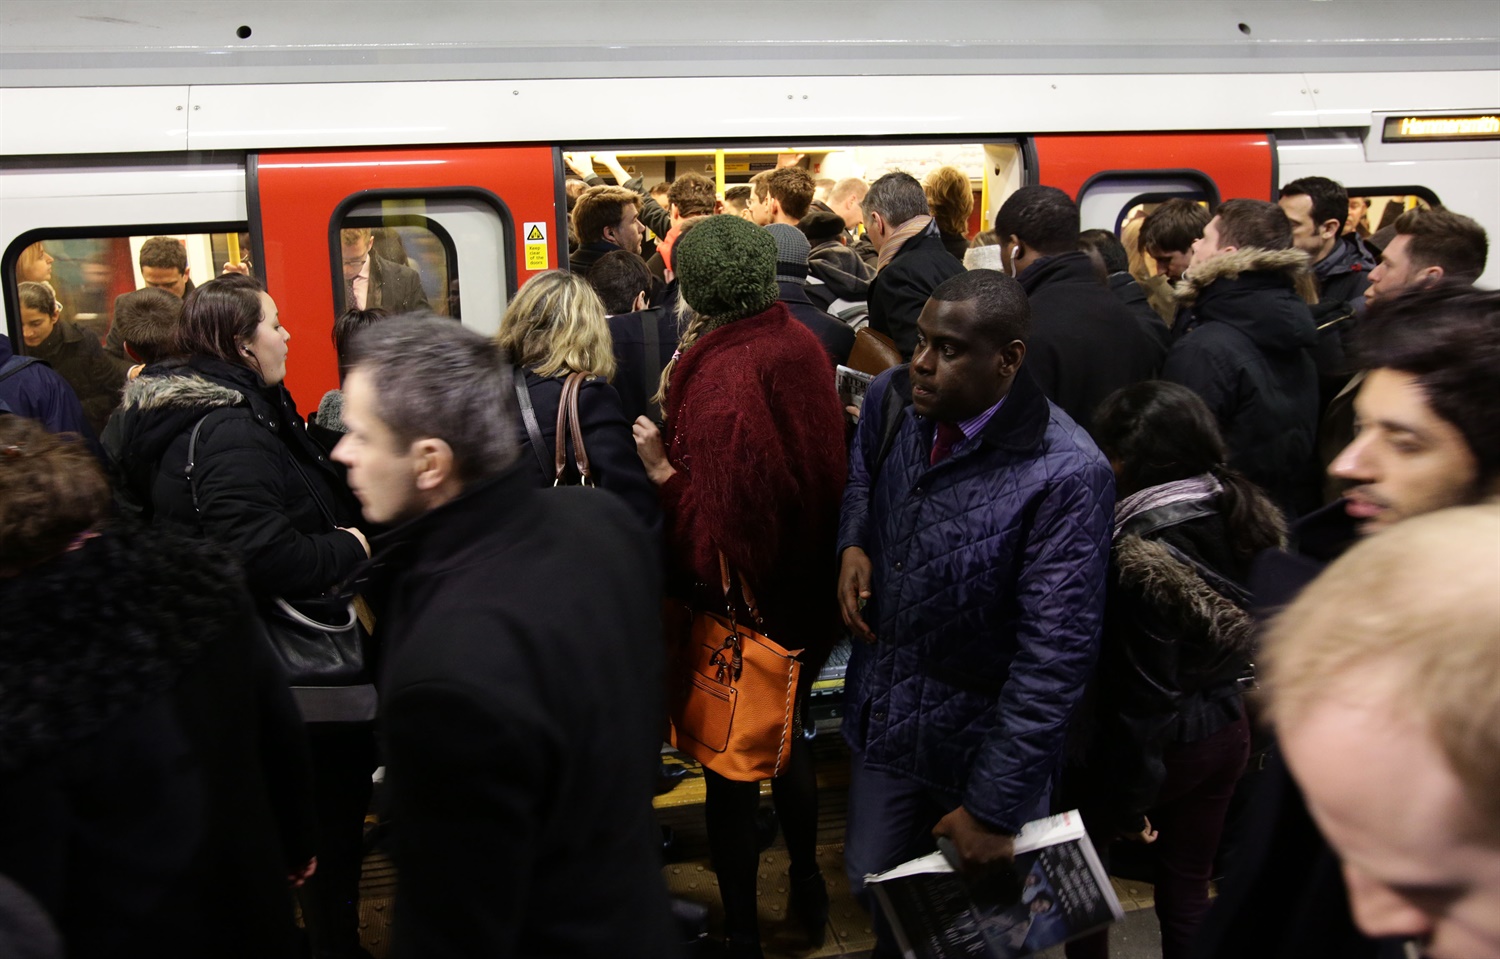 Campaign leads to 36% increase in sexual harassment complaints on London transport